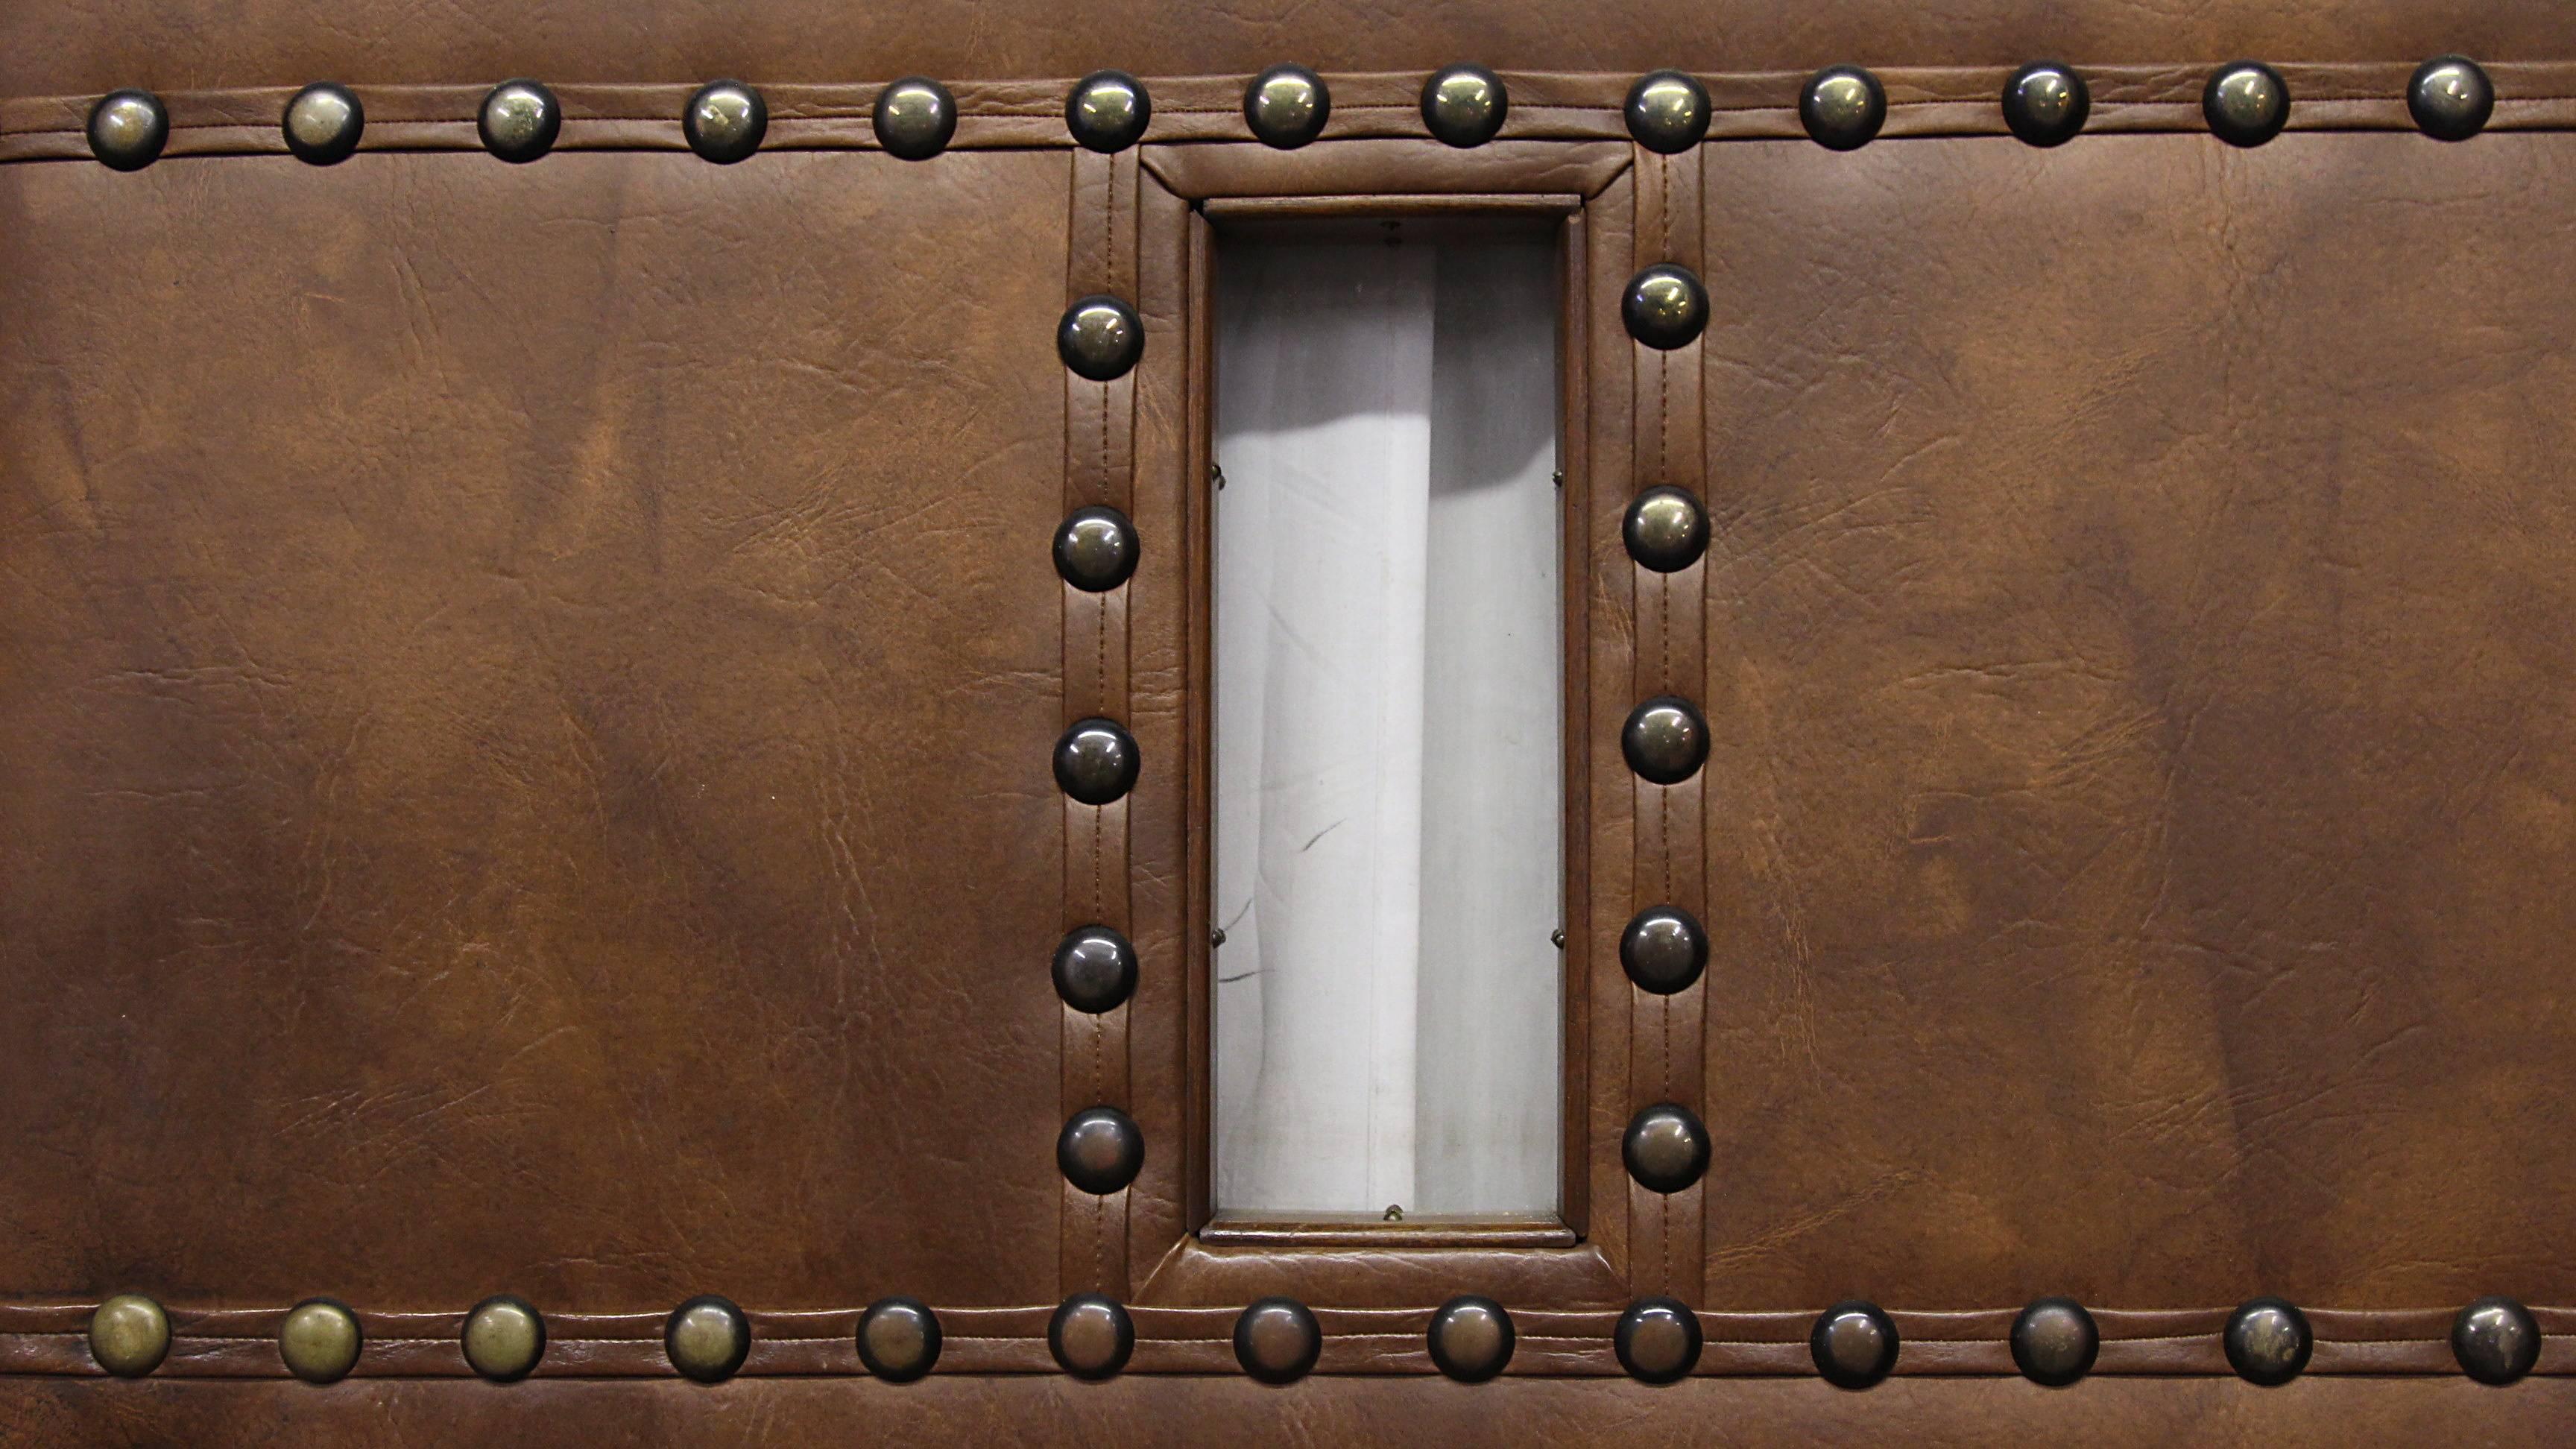 1940s leather like studded swinging door with original hardware including push and kick plates and window. This can be seen at our 400 Gilligan St location in Scranton, PA.